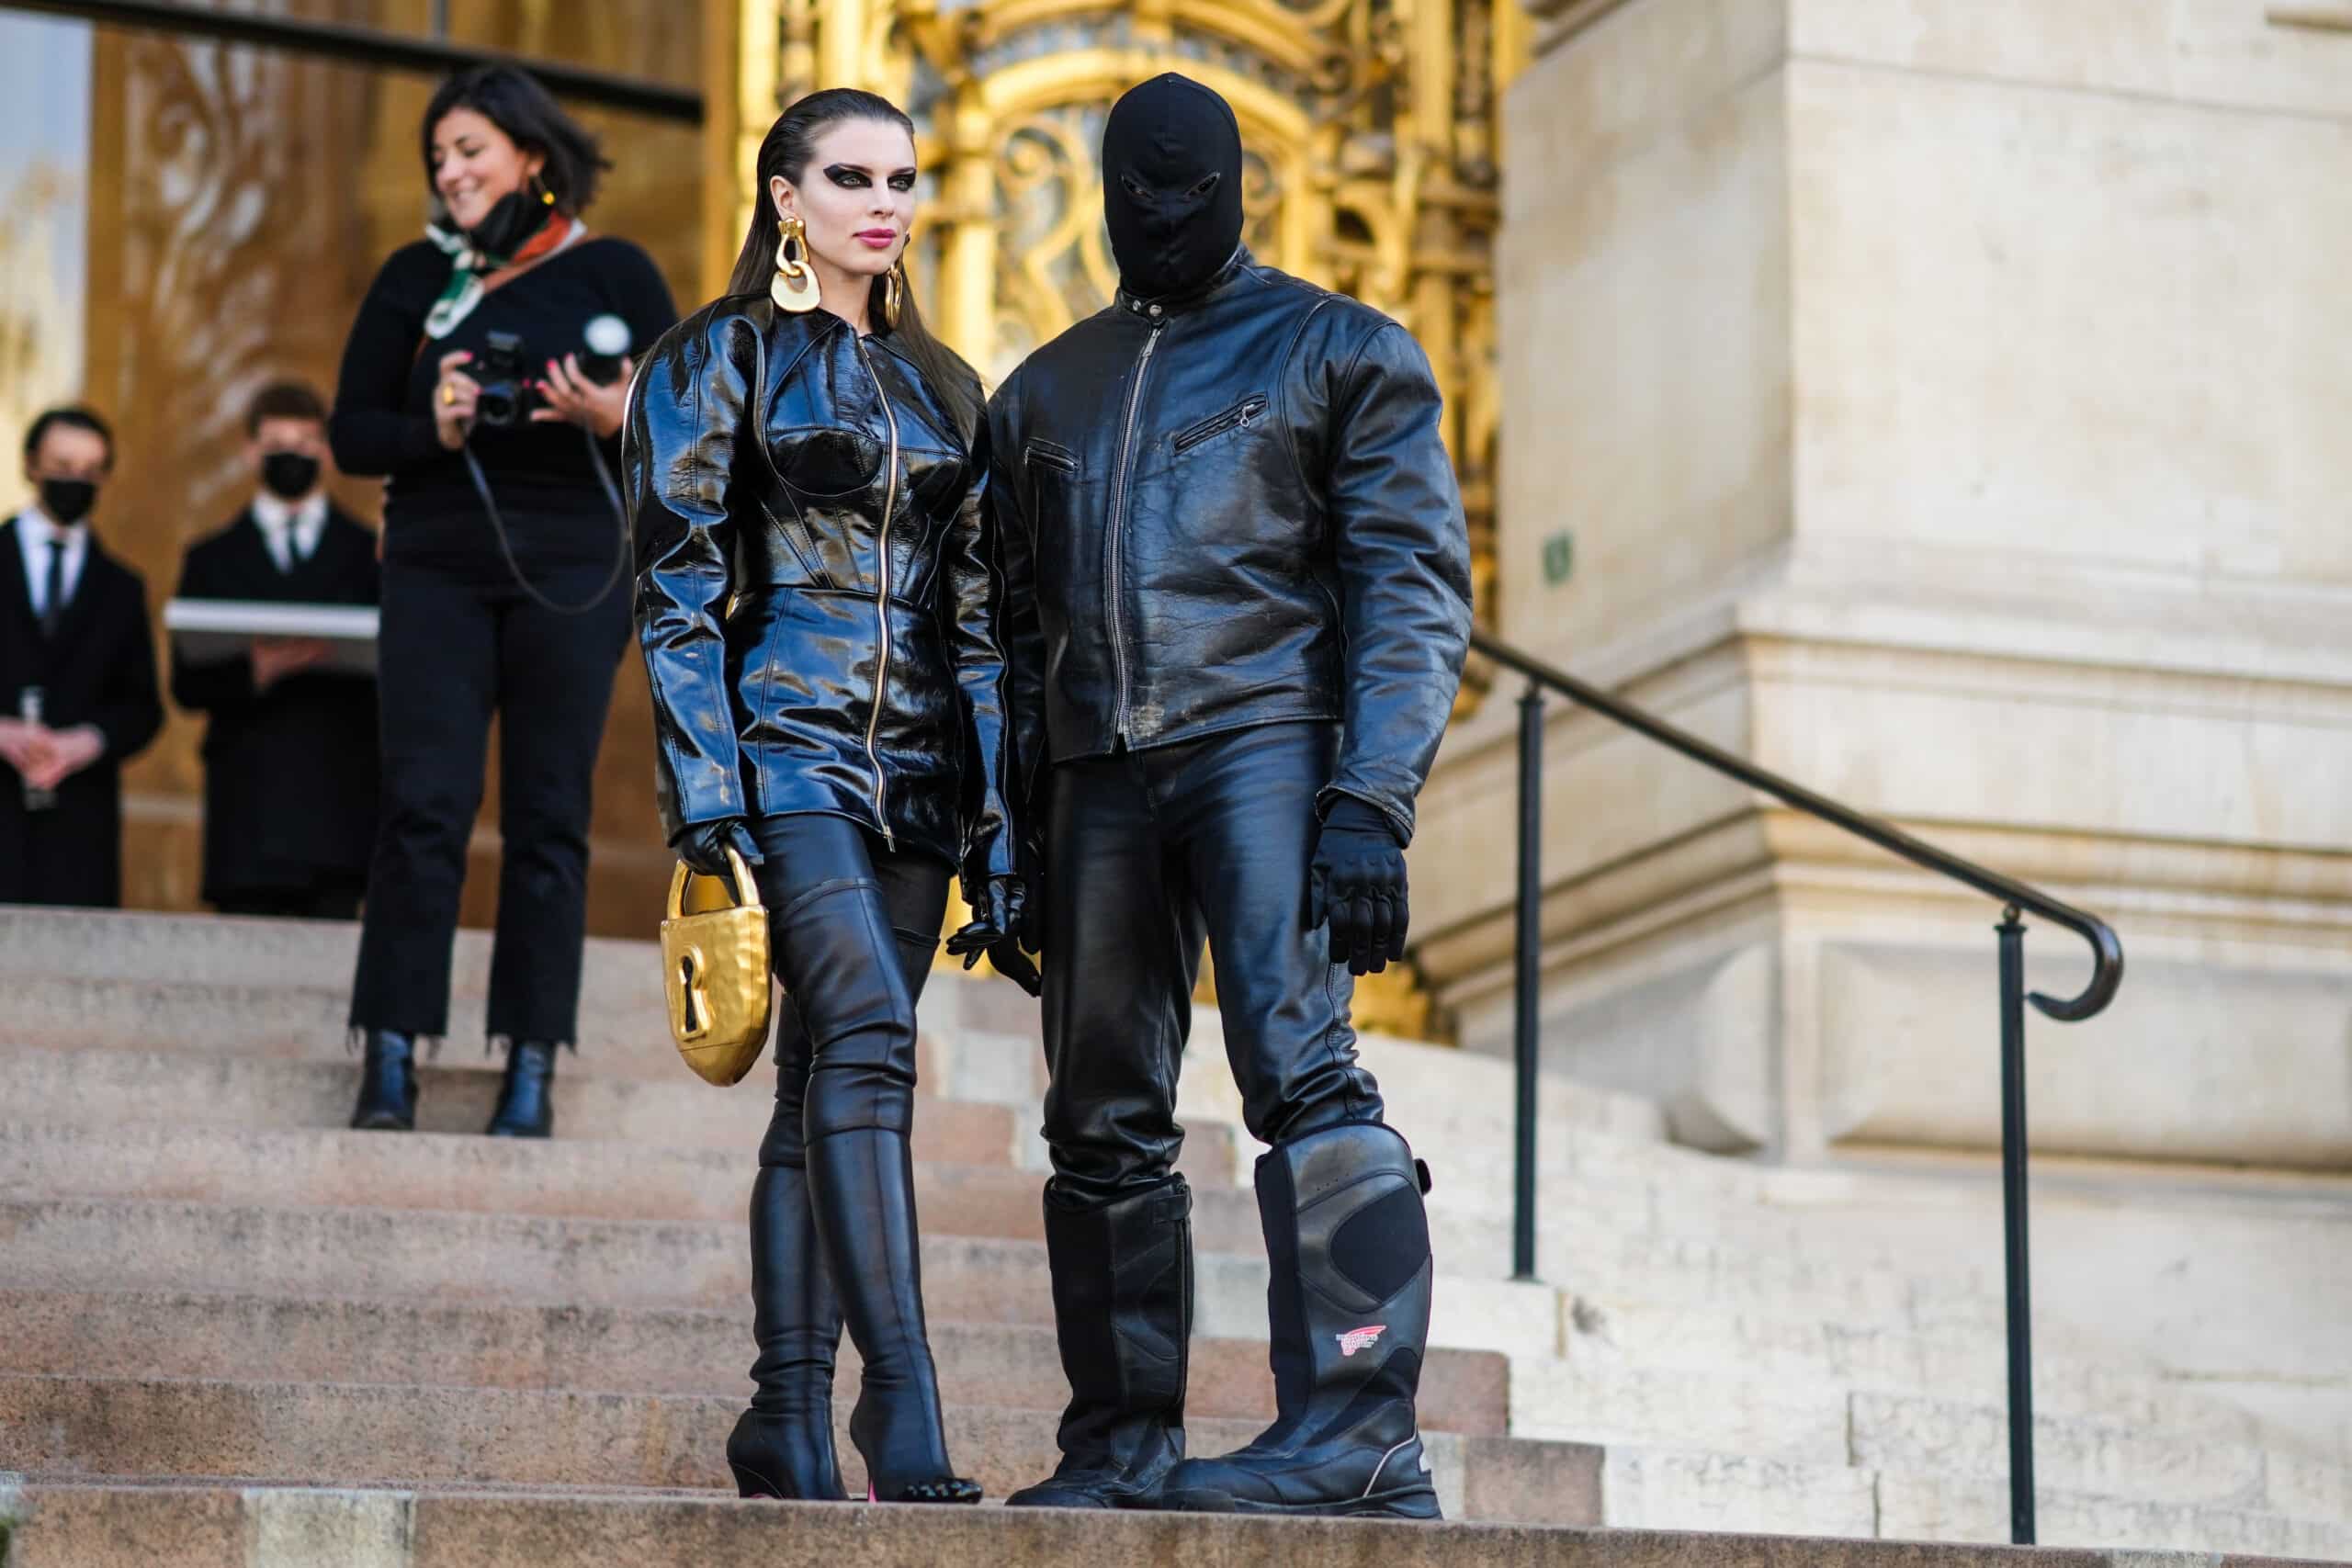 PARIS, FRANCE - JANUARY 24: Julia Fox and Ye are seen, outside Schiaparelli, during Paris Fashion Week - Haute Couture Spring/Summer 2022, on January 24, 2022 in Paris, France.